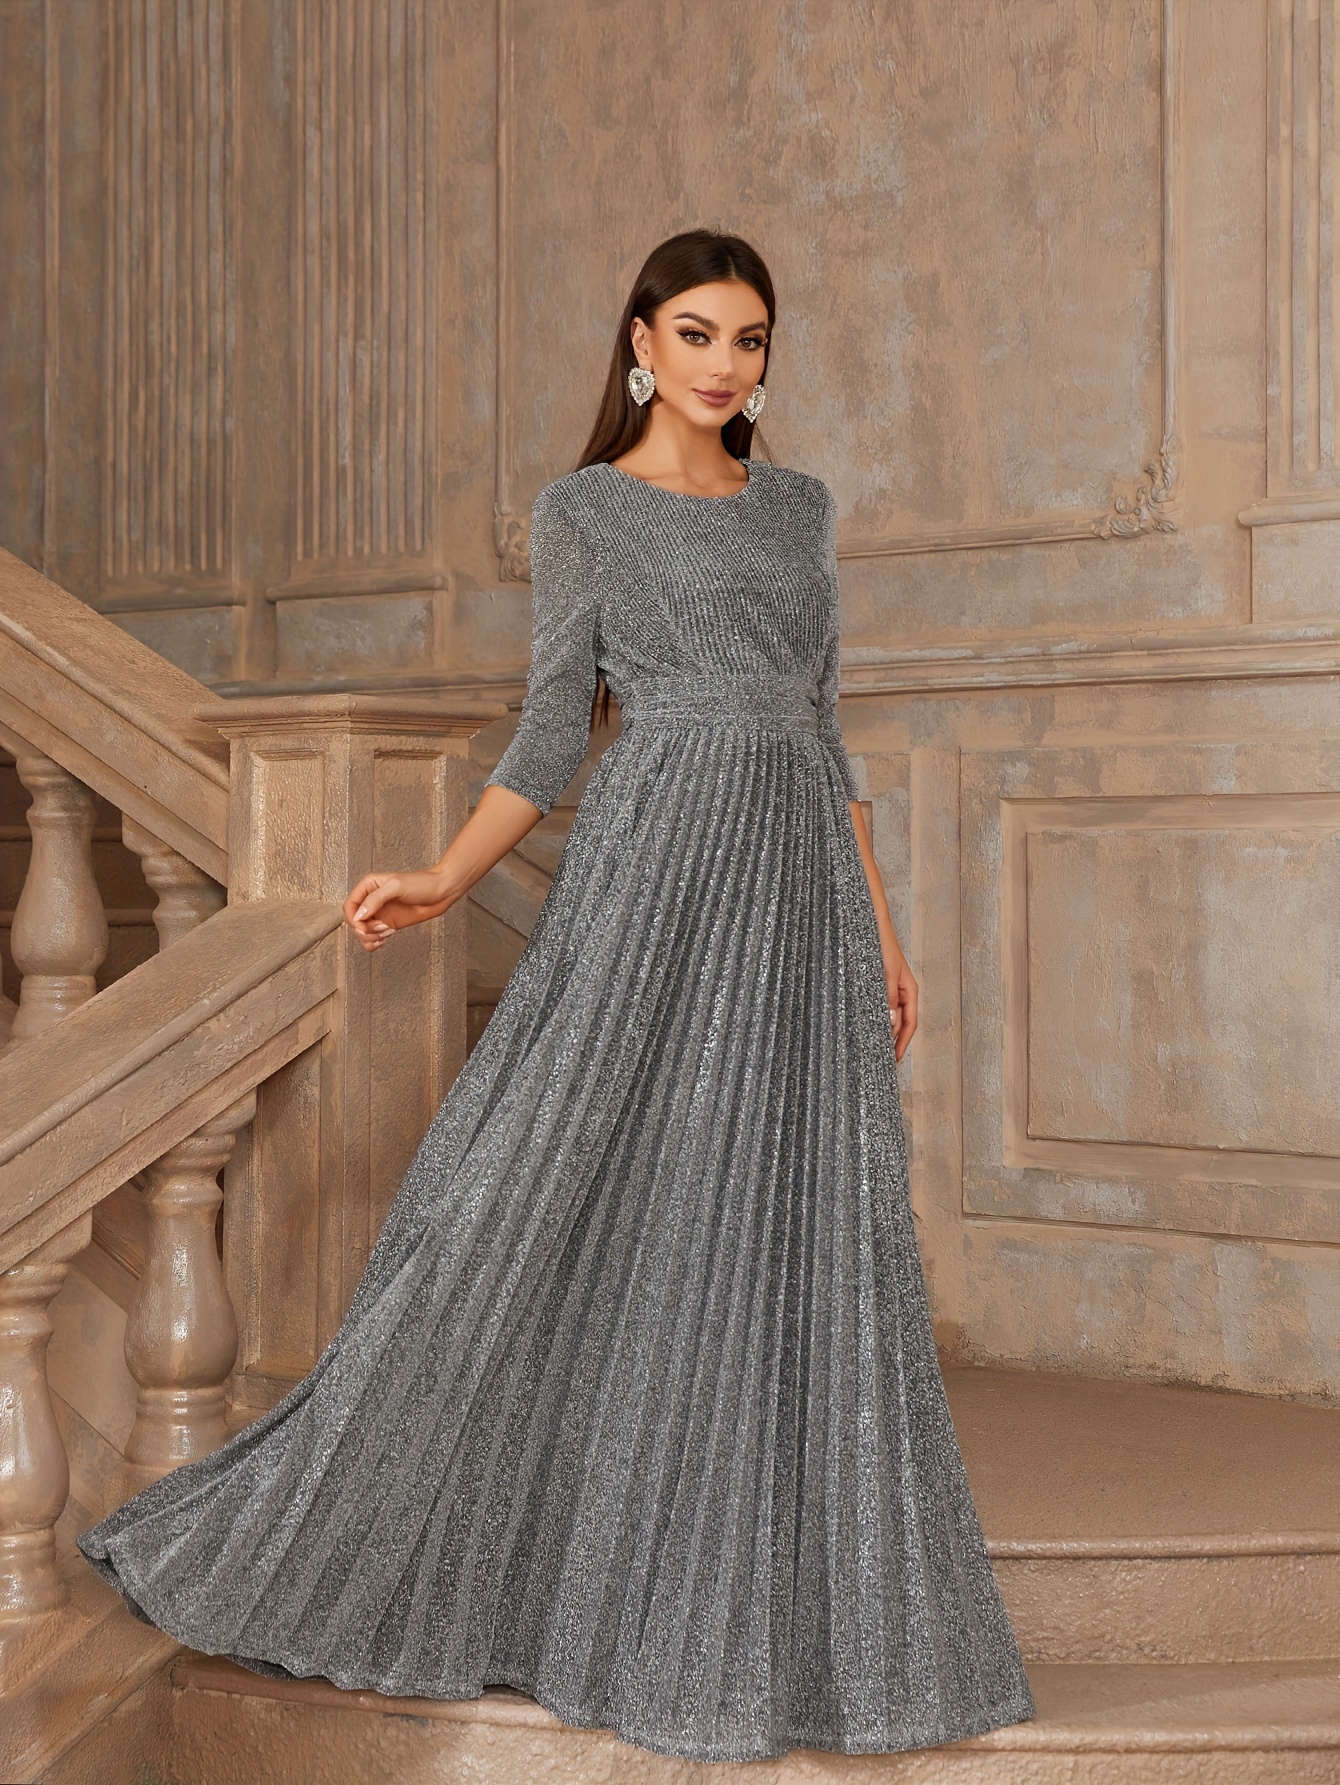 sparkling crew neck dress elegant 3 4 sleeve a line evening dress for party banquet womens clothing